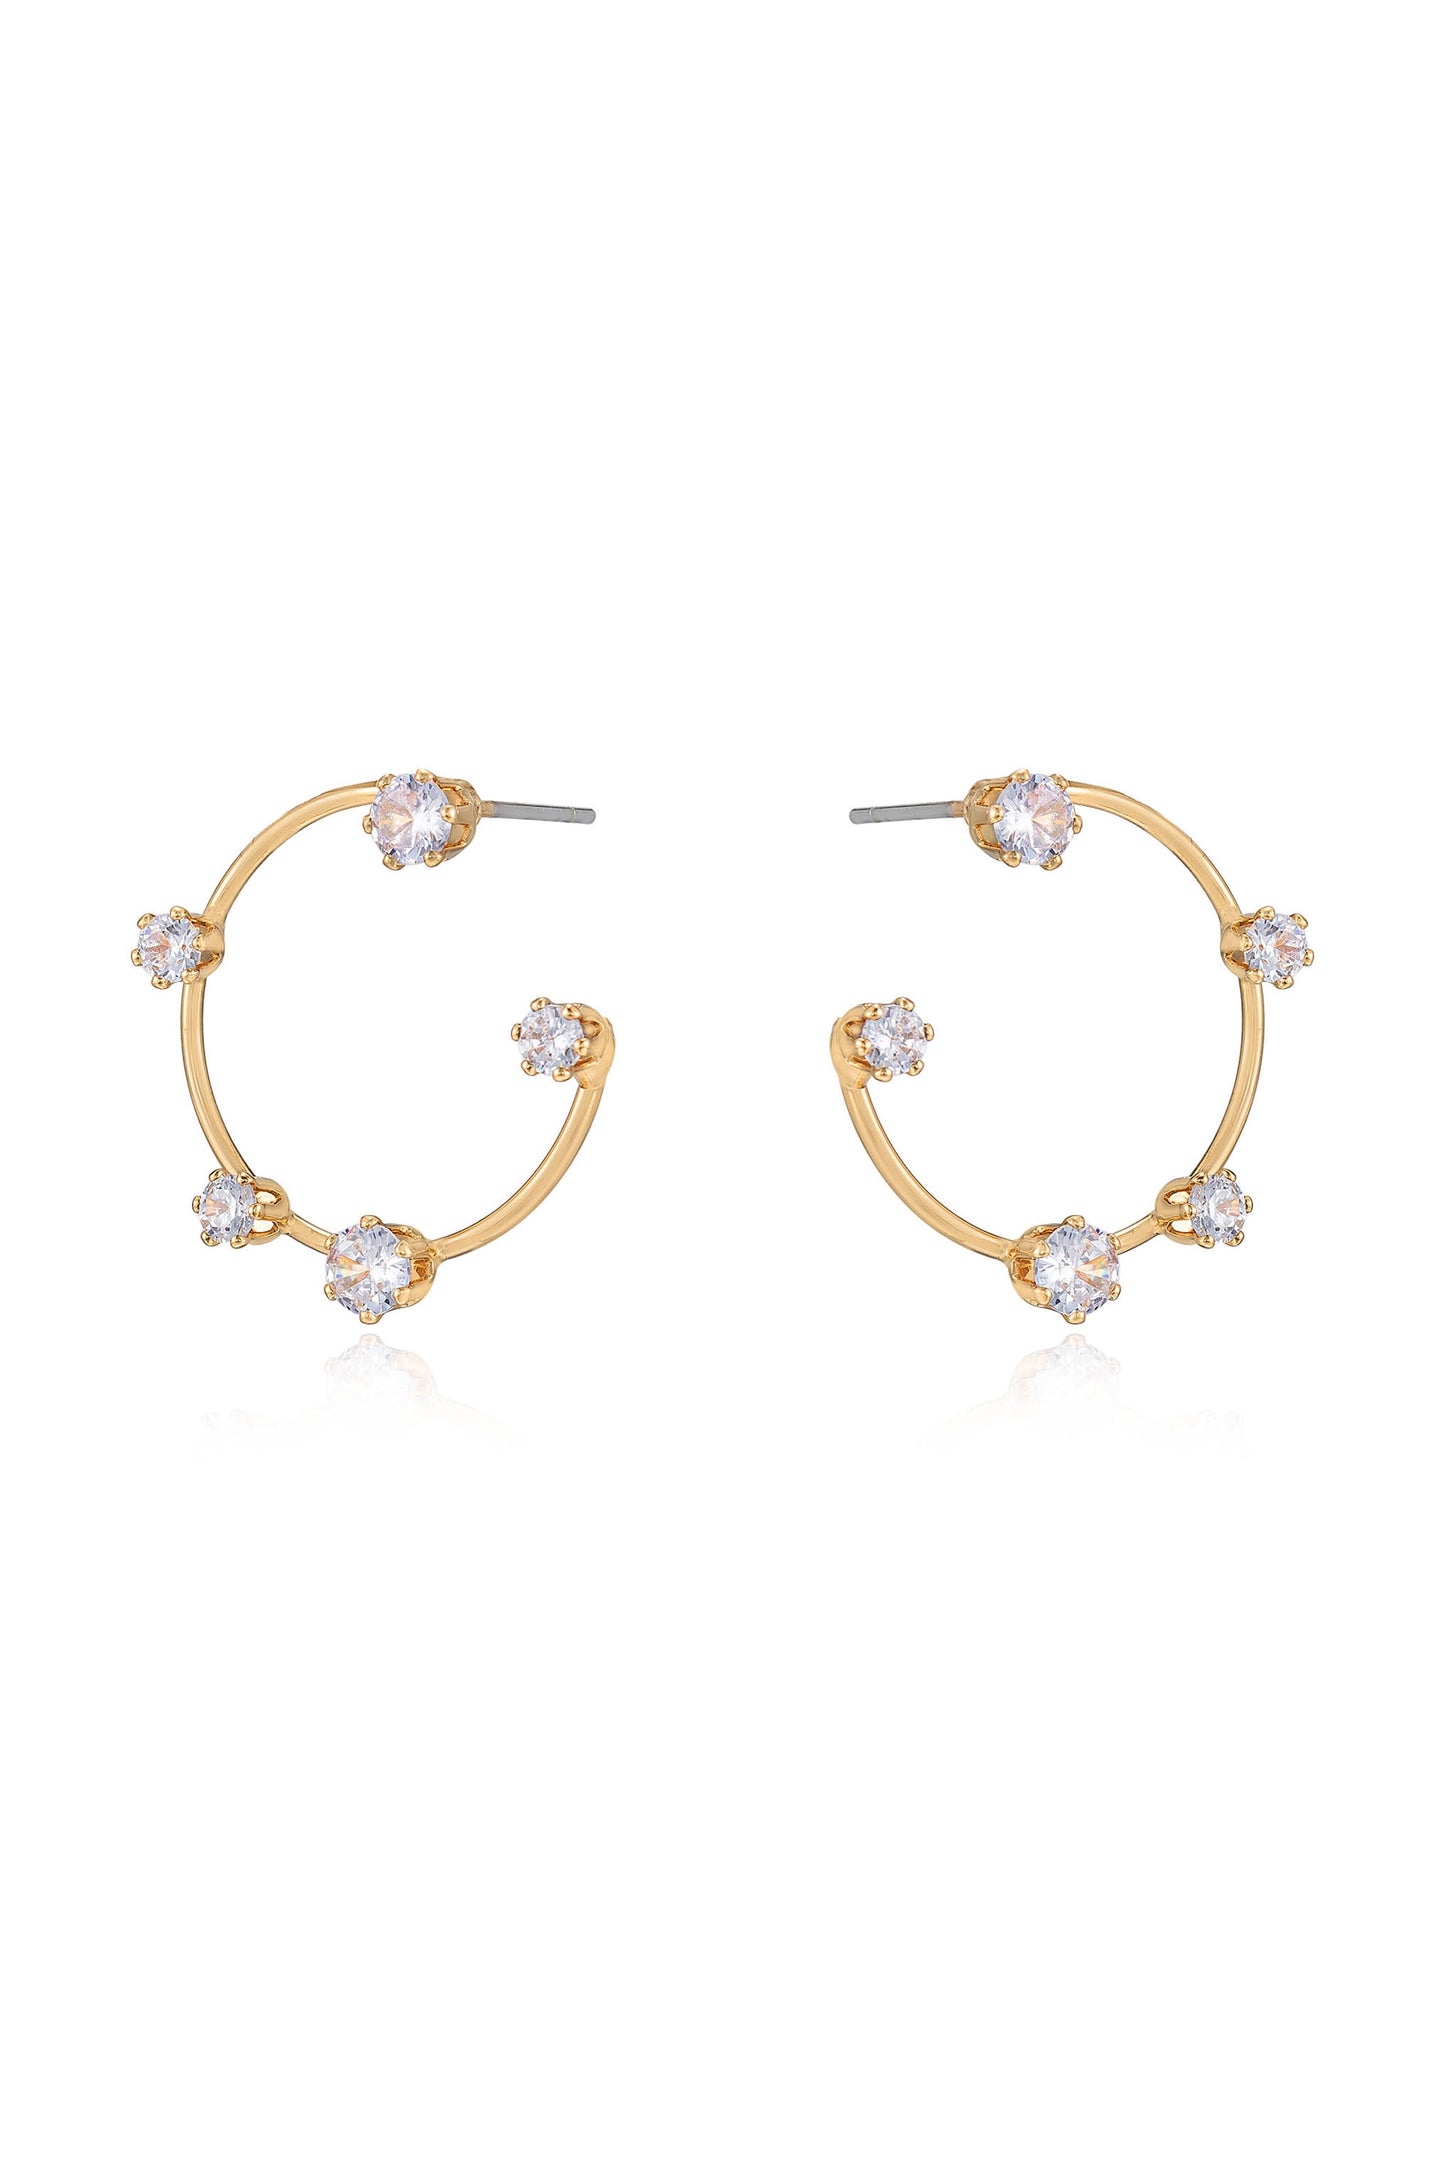 Celestial Small Wire & Crystal Ring 18k Gold Plated Earrings side